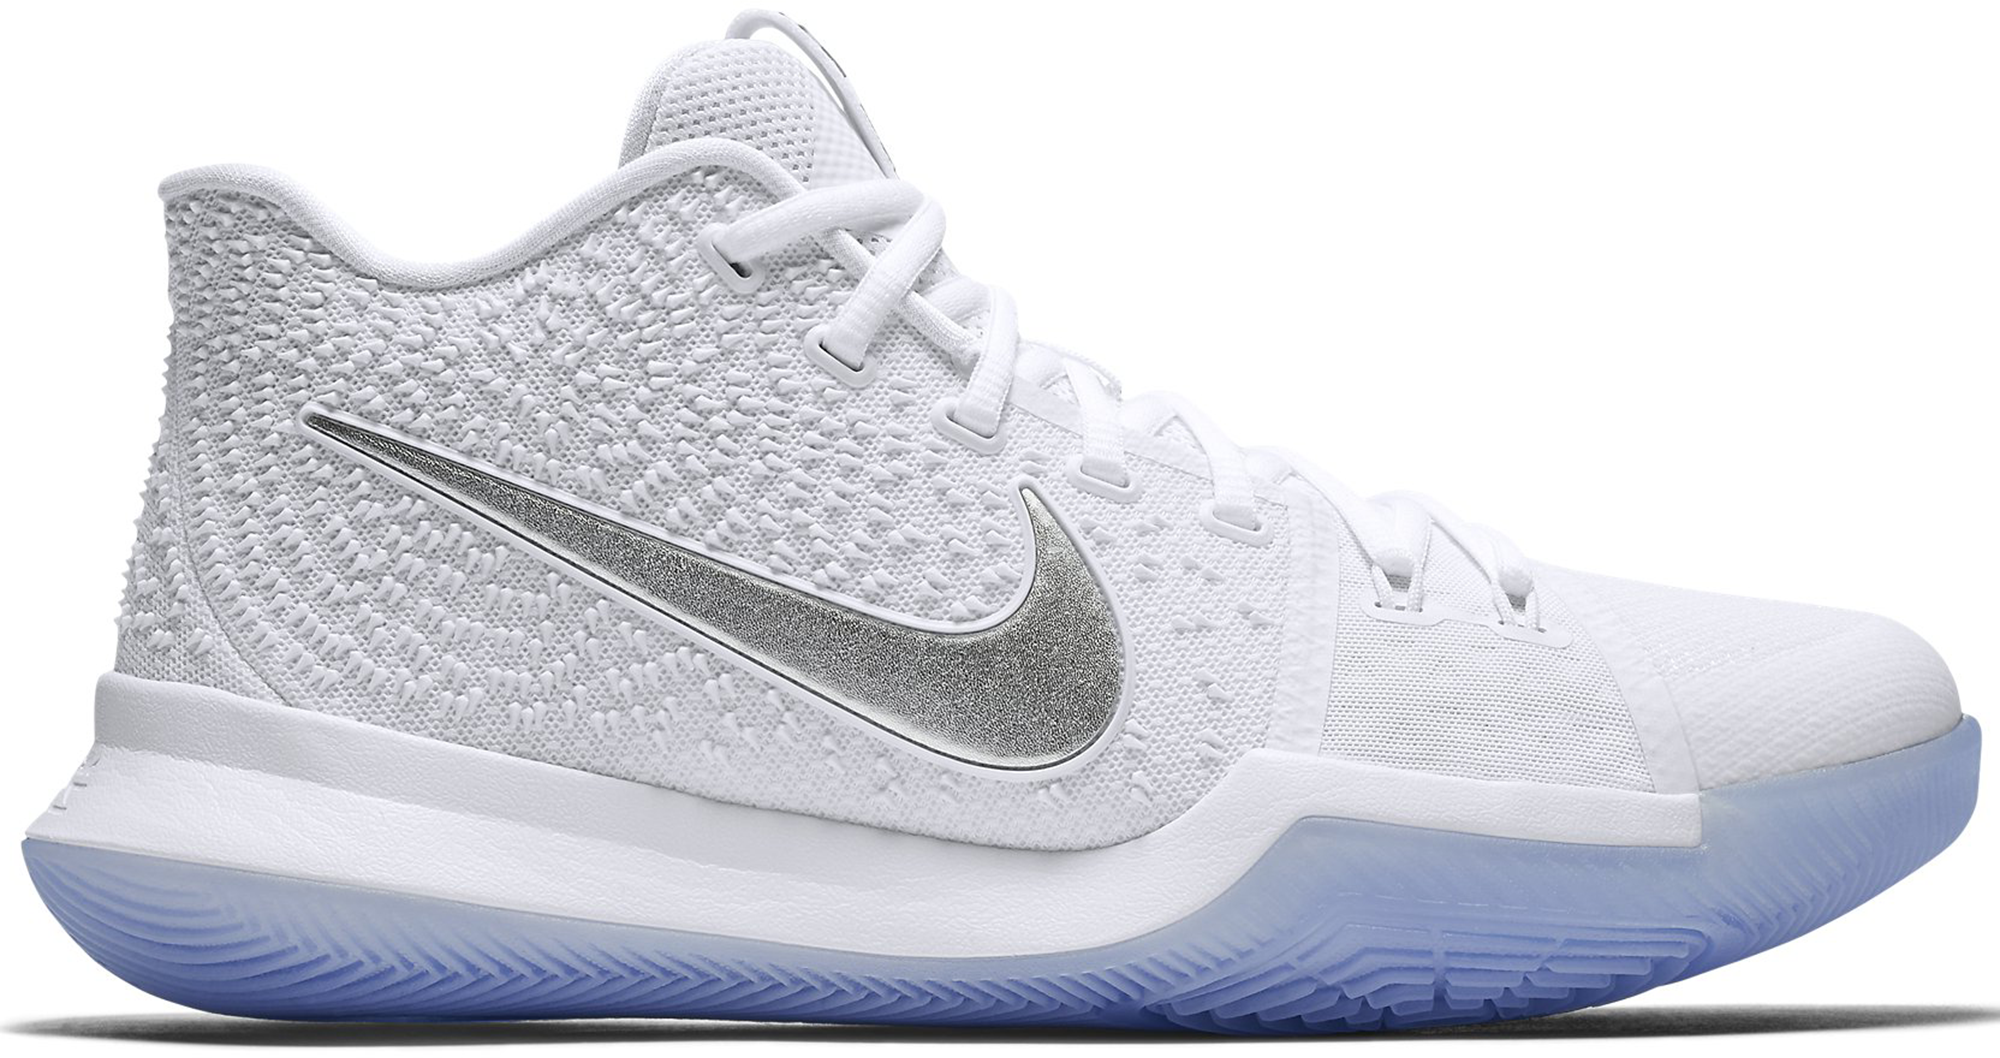 kyrie 3 blue and white